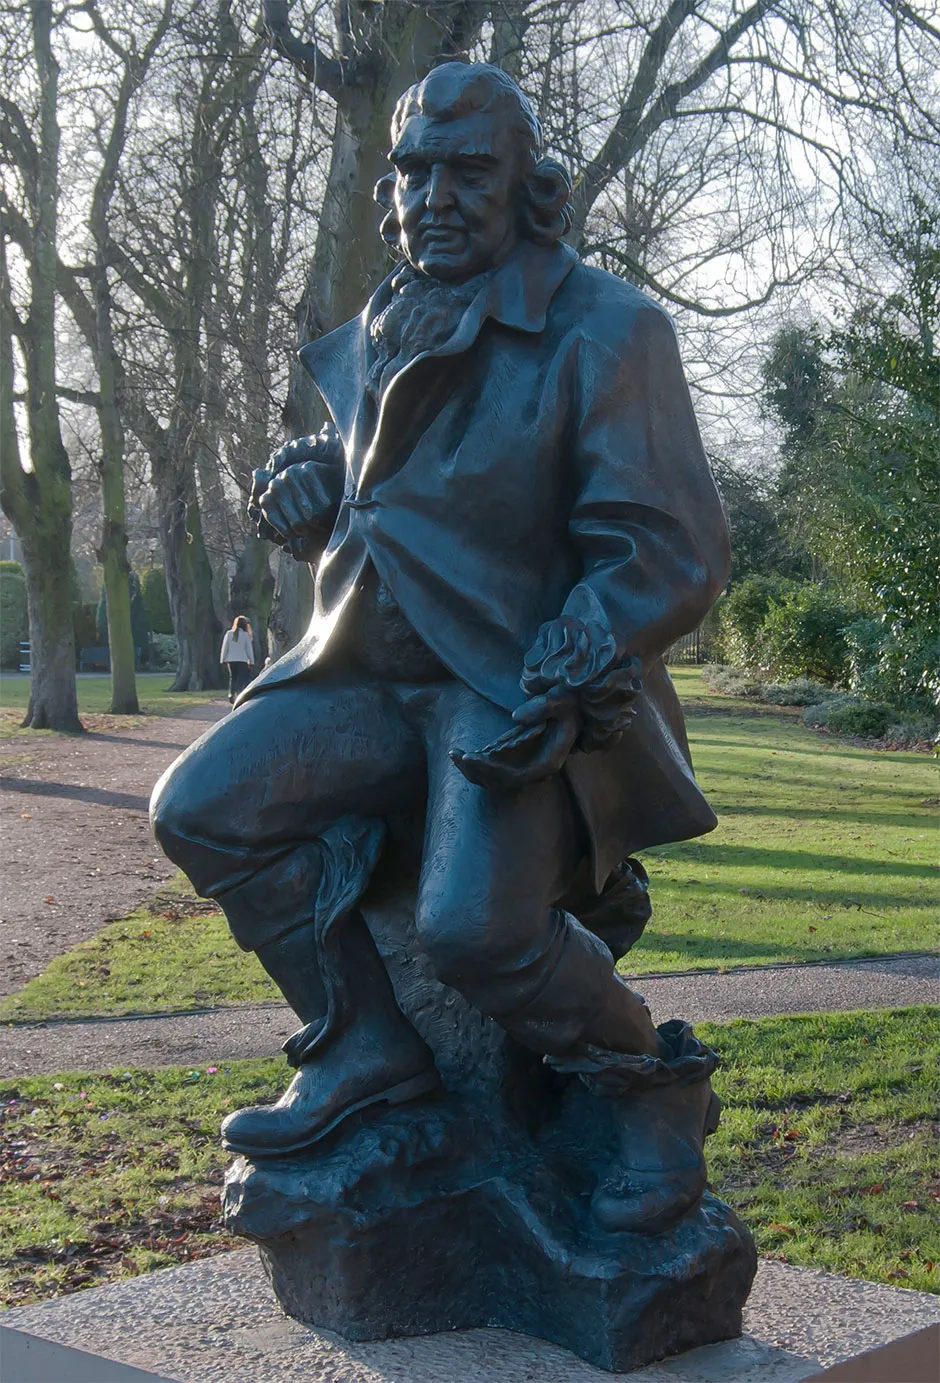 The statue of Erasmus Darwin in Beacon Park, Lichfield © Bs0u10e01 / CC BY-SA (https://creativecommons.org/licenses/by-sa/3.0)